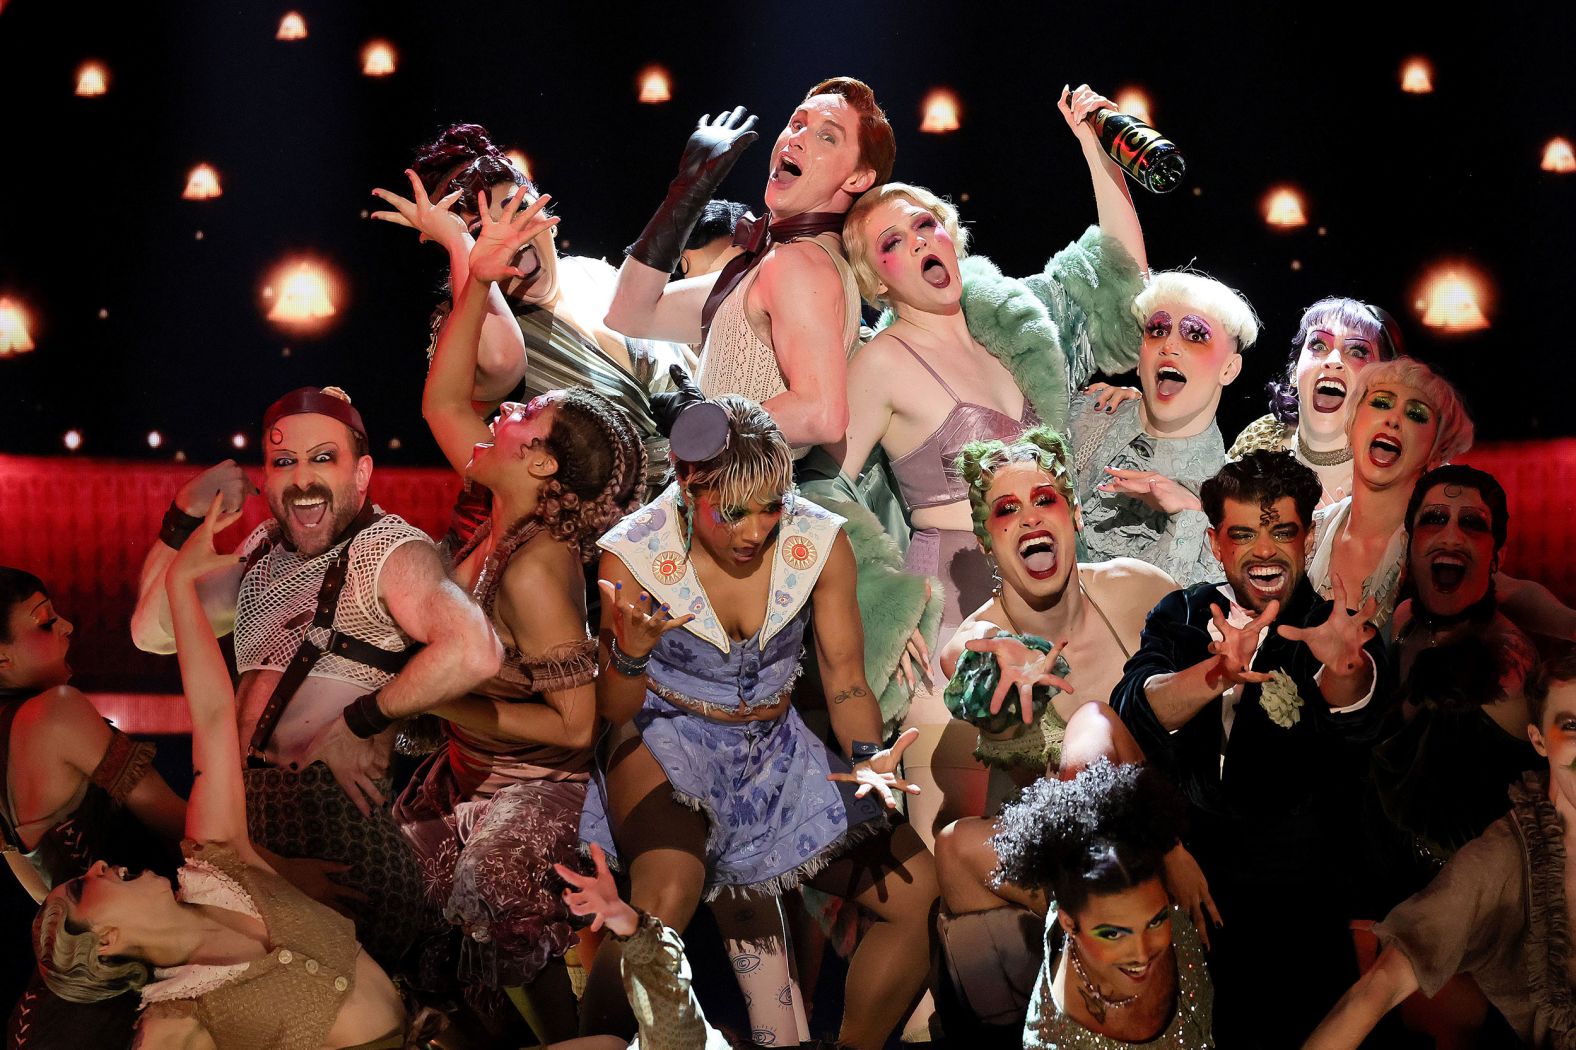 Eddie Redmayne and Gayle Rankin, center top, perform with other cast members from the “Cabaret at the Kit Kat Club" during the Tony Awards in New York on Sunday, June 16. <a href="https://www.cnn.com/2024/06/16/entertainment/gallery/the-best-photos-from-the-2024-tony-awards/index.html">See the best photos from the show</a>.